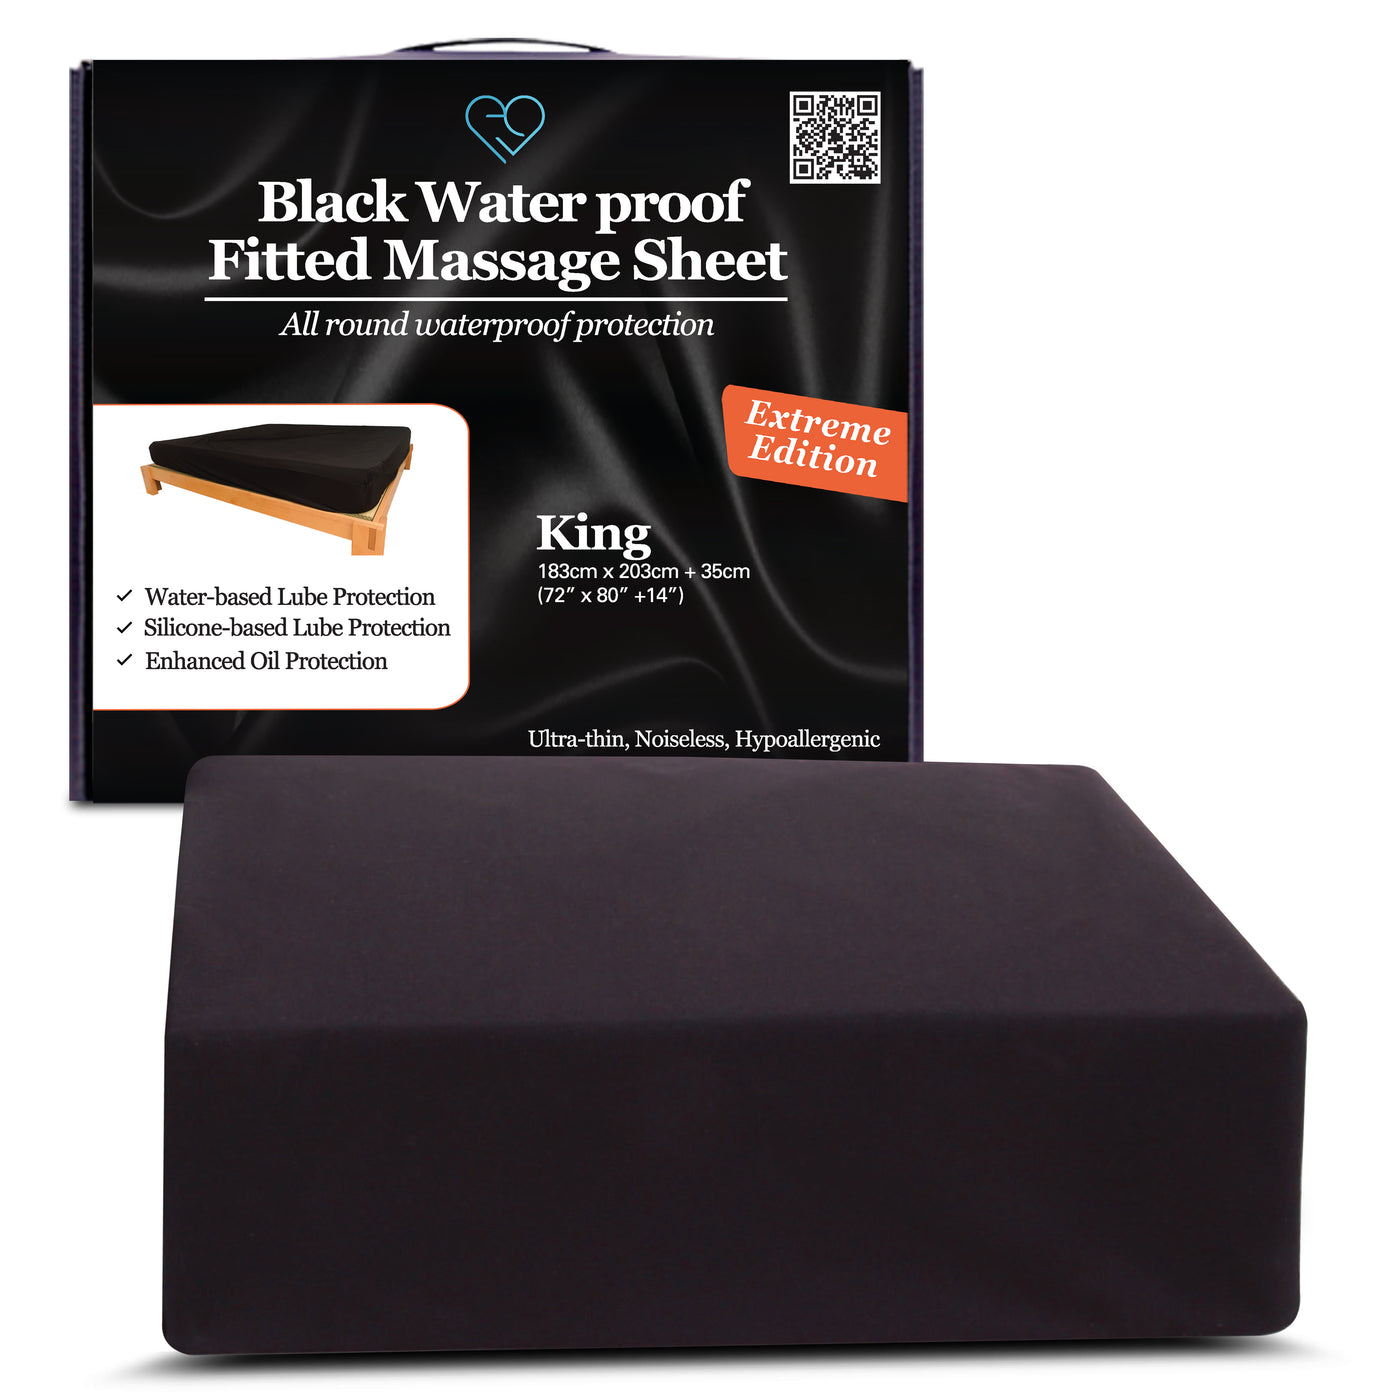 Eroticgel KING Waterproof Fitted Sheet EXTREME Edition 183cm x 203cm + 35cm (72″x 80″ + 14″)